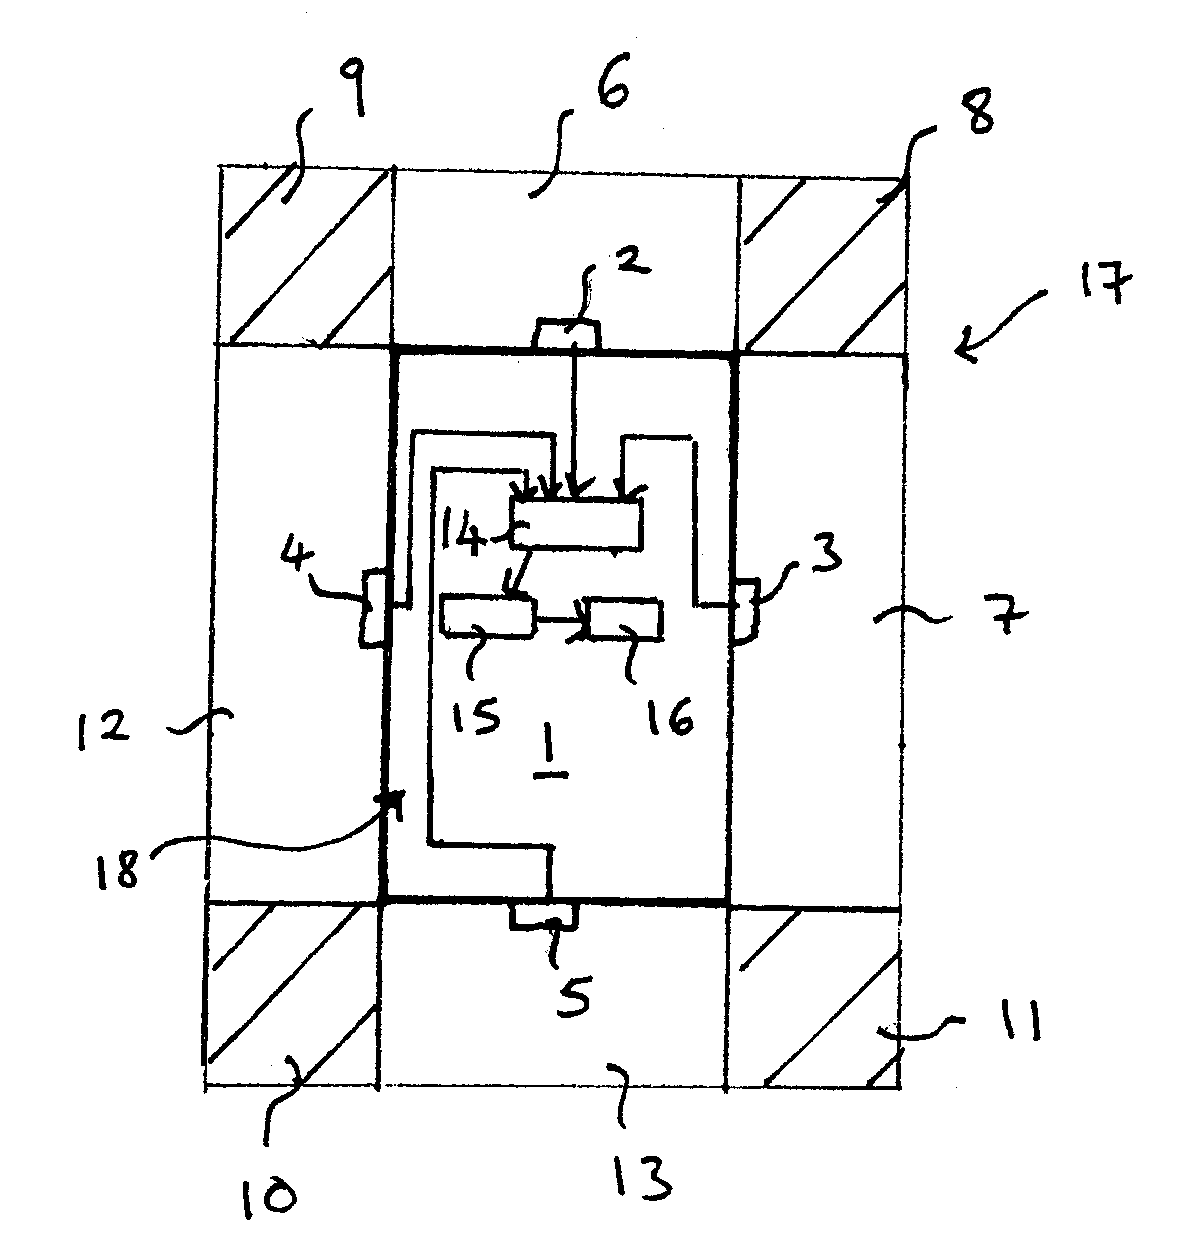 System, Device and Method for Displaying a Harmonized Combined Image